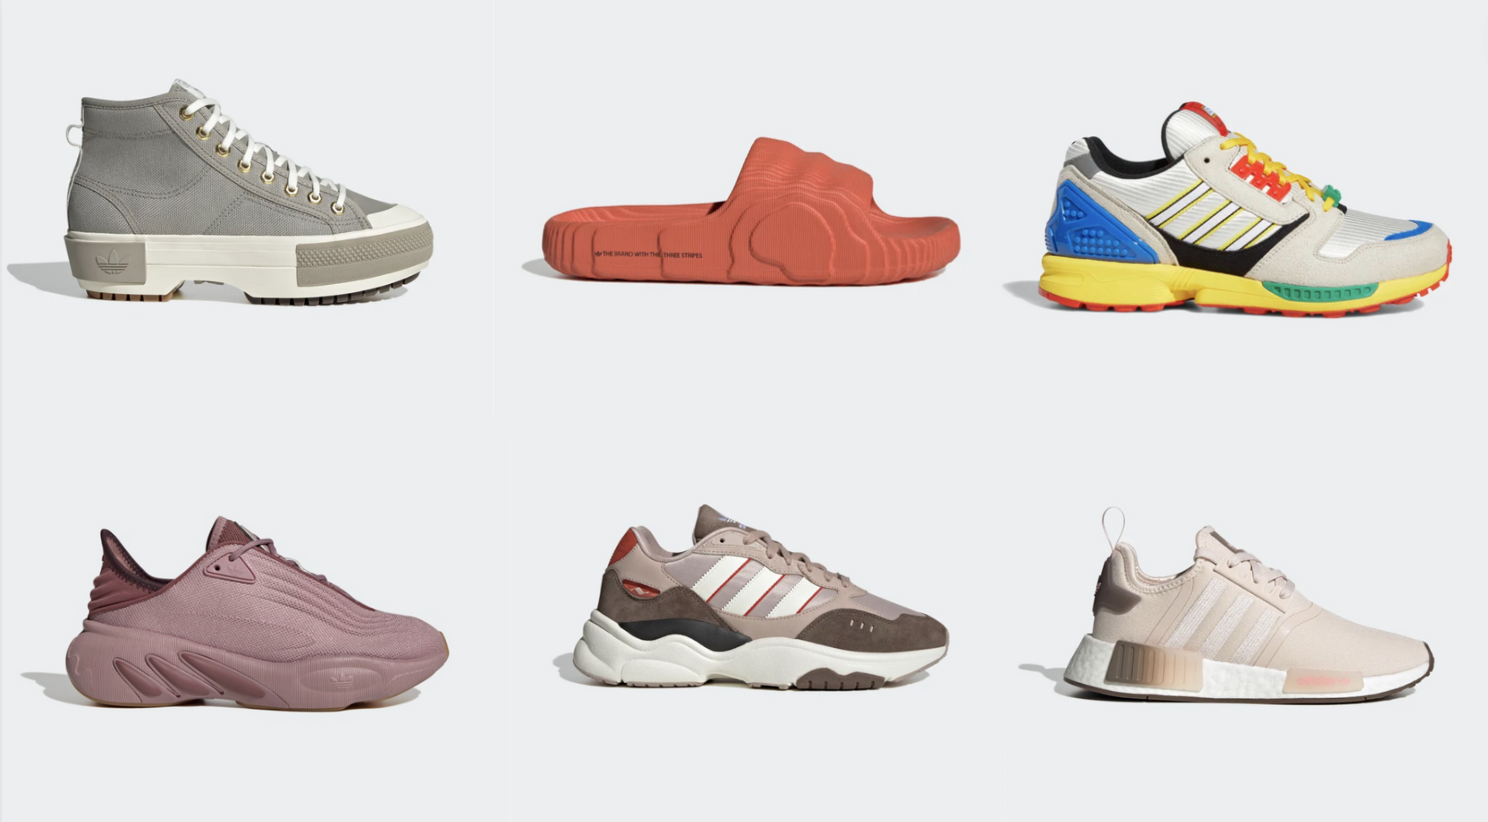 What Are The Best Adidas Silhouettes? Trending Adidas Sneakers Here.